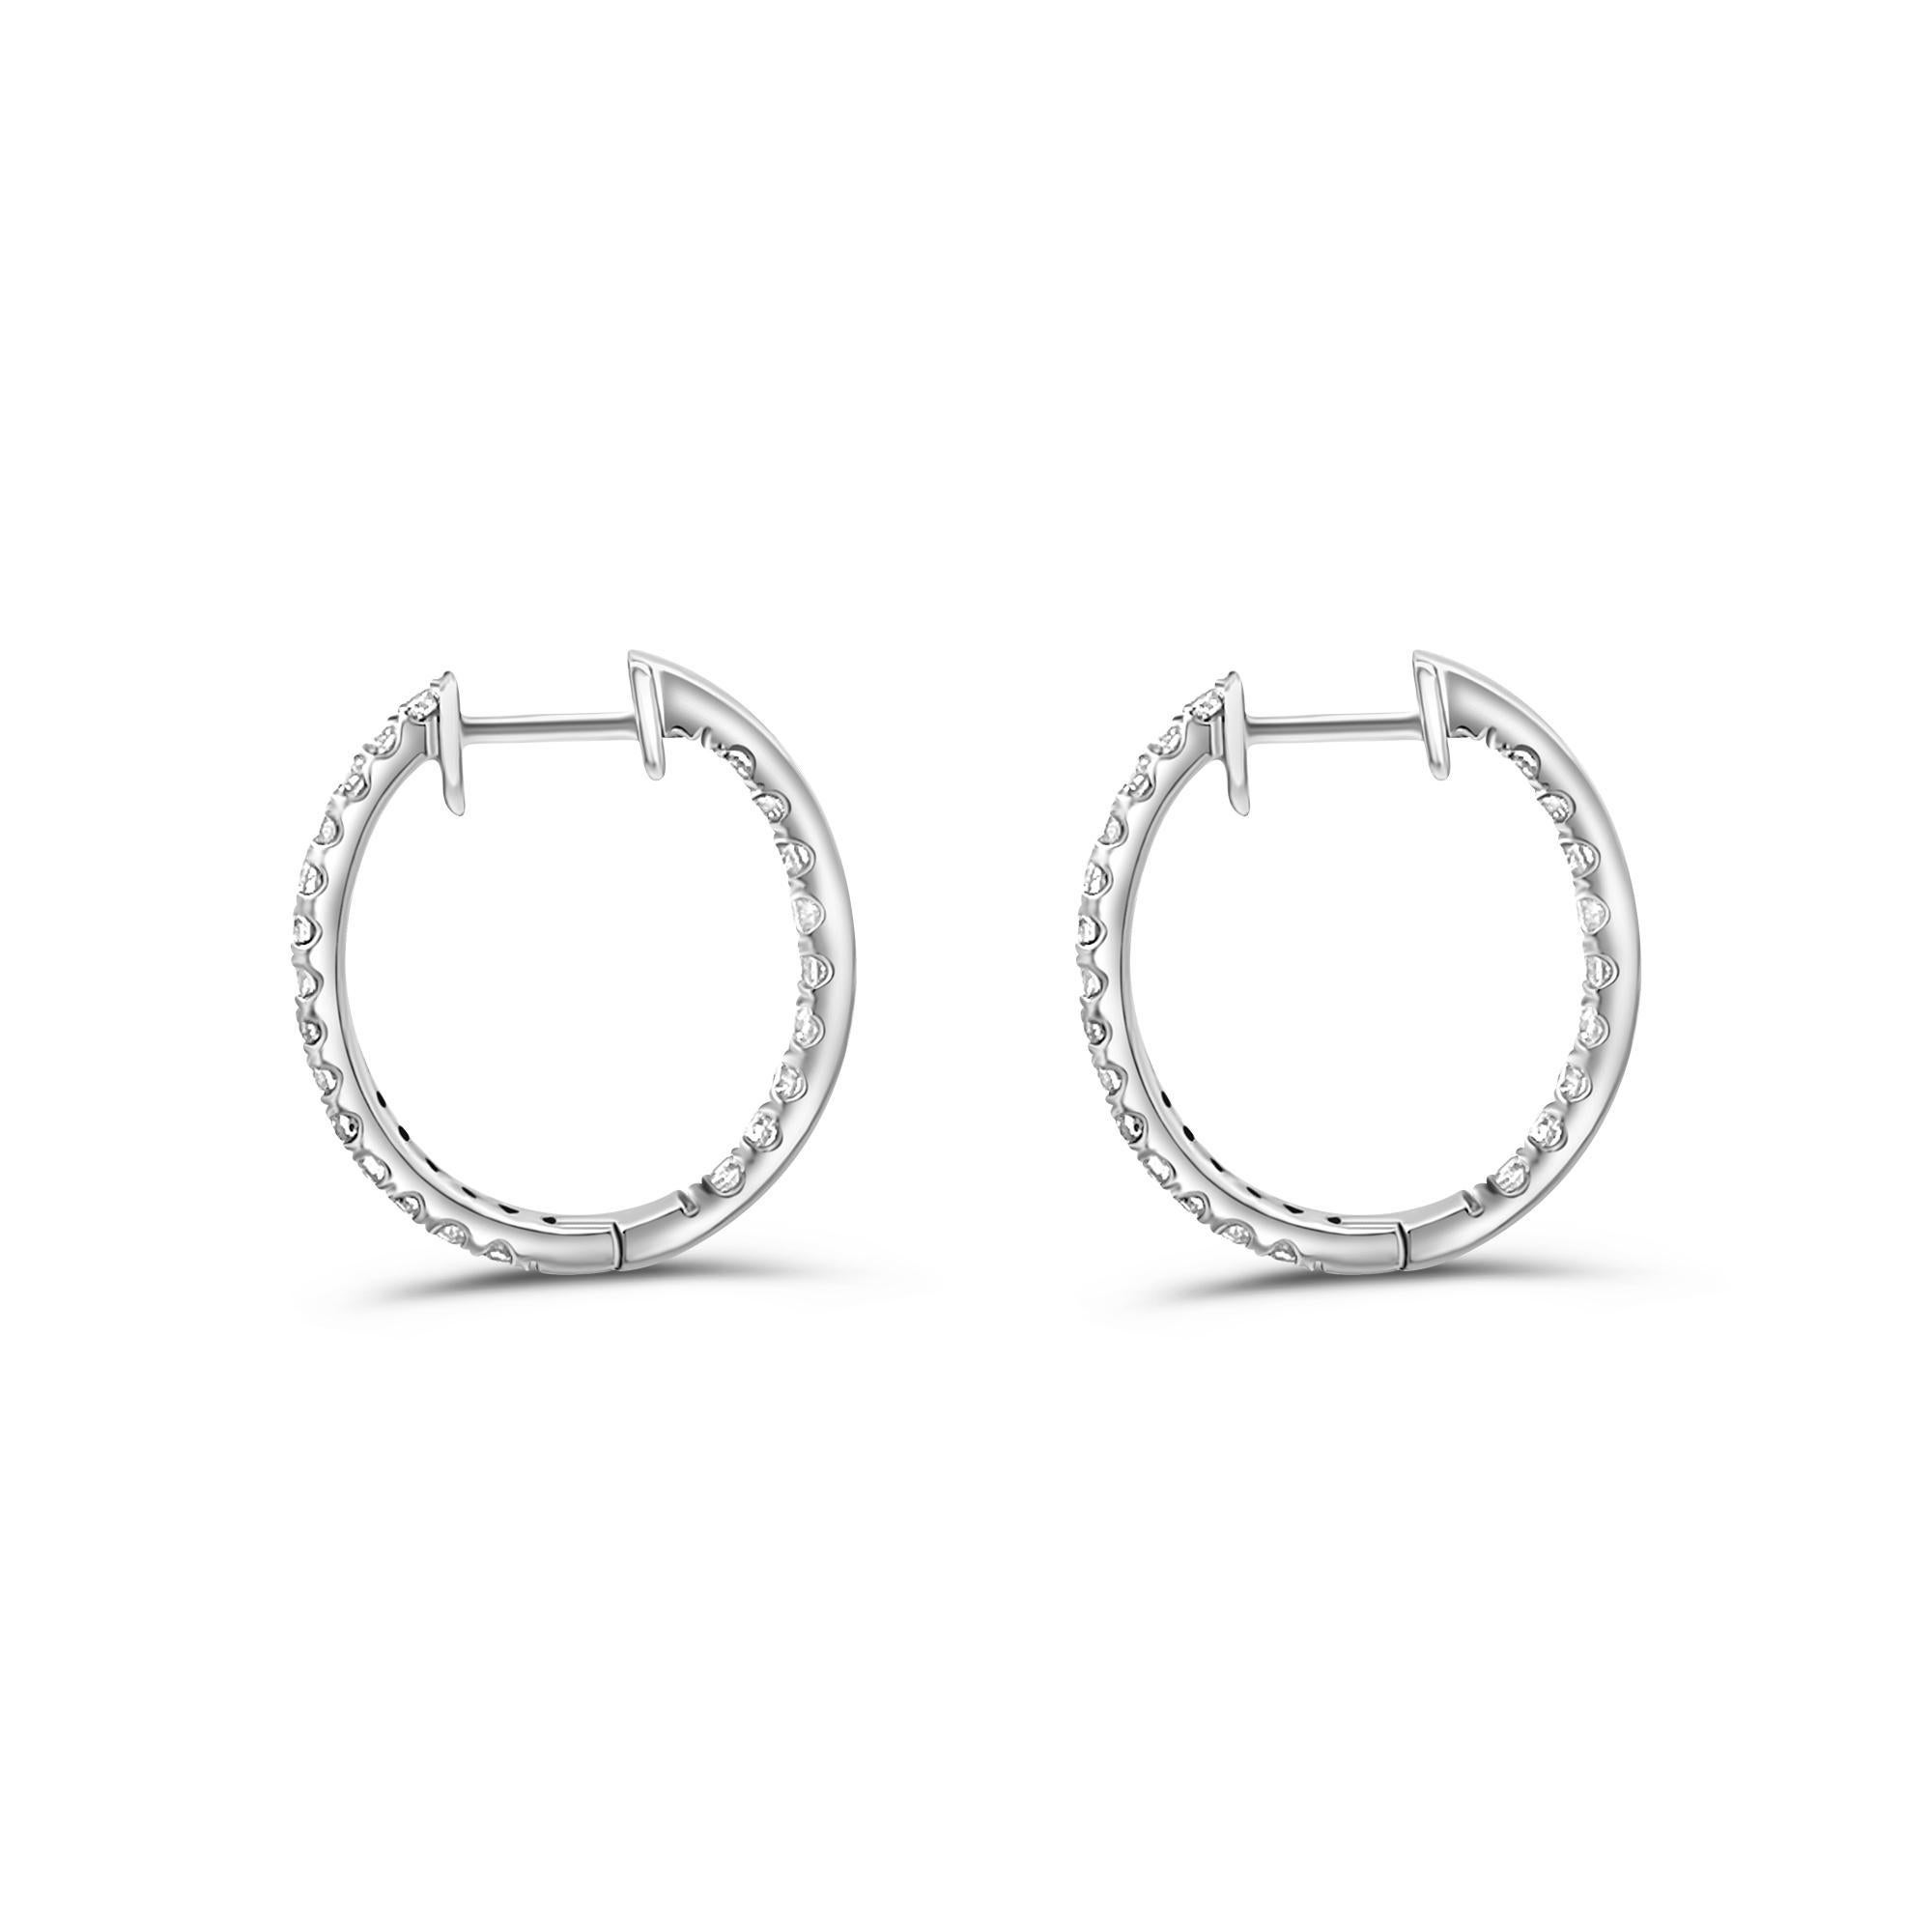 Simple and elegant natural diamond classic hoop earrings set in 14k Solid Gold for long-lasting and durable use. Hinged snap-back closure with a strong lever for extra versatility and comfort. Inside out eternity setting for sparkling brilliance at